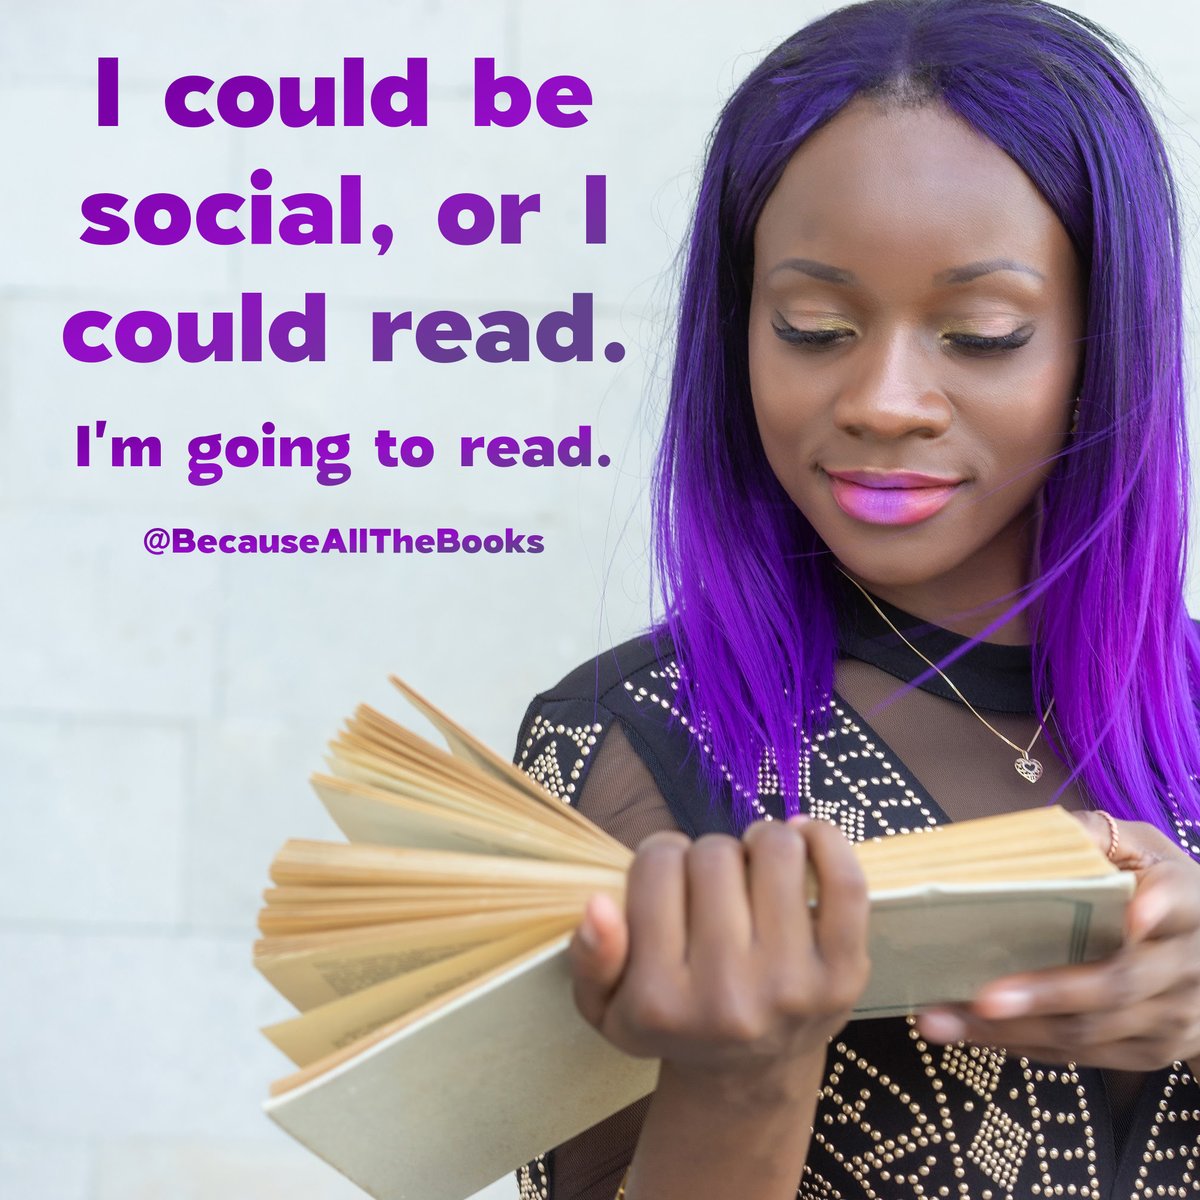 Who's with me? And by with me I mean reading...not being social. 😂

#BecauseAllTheBooks #BookAddicts #Bookaholics #BookLoversUnite #BooksAreMyBag #NeedToReadItNow